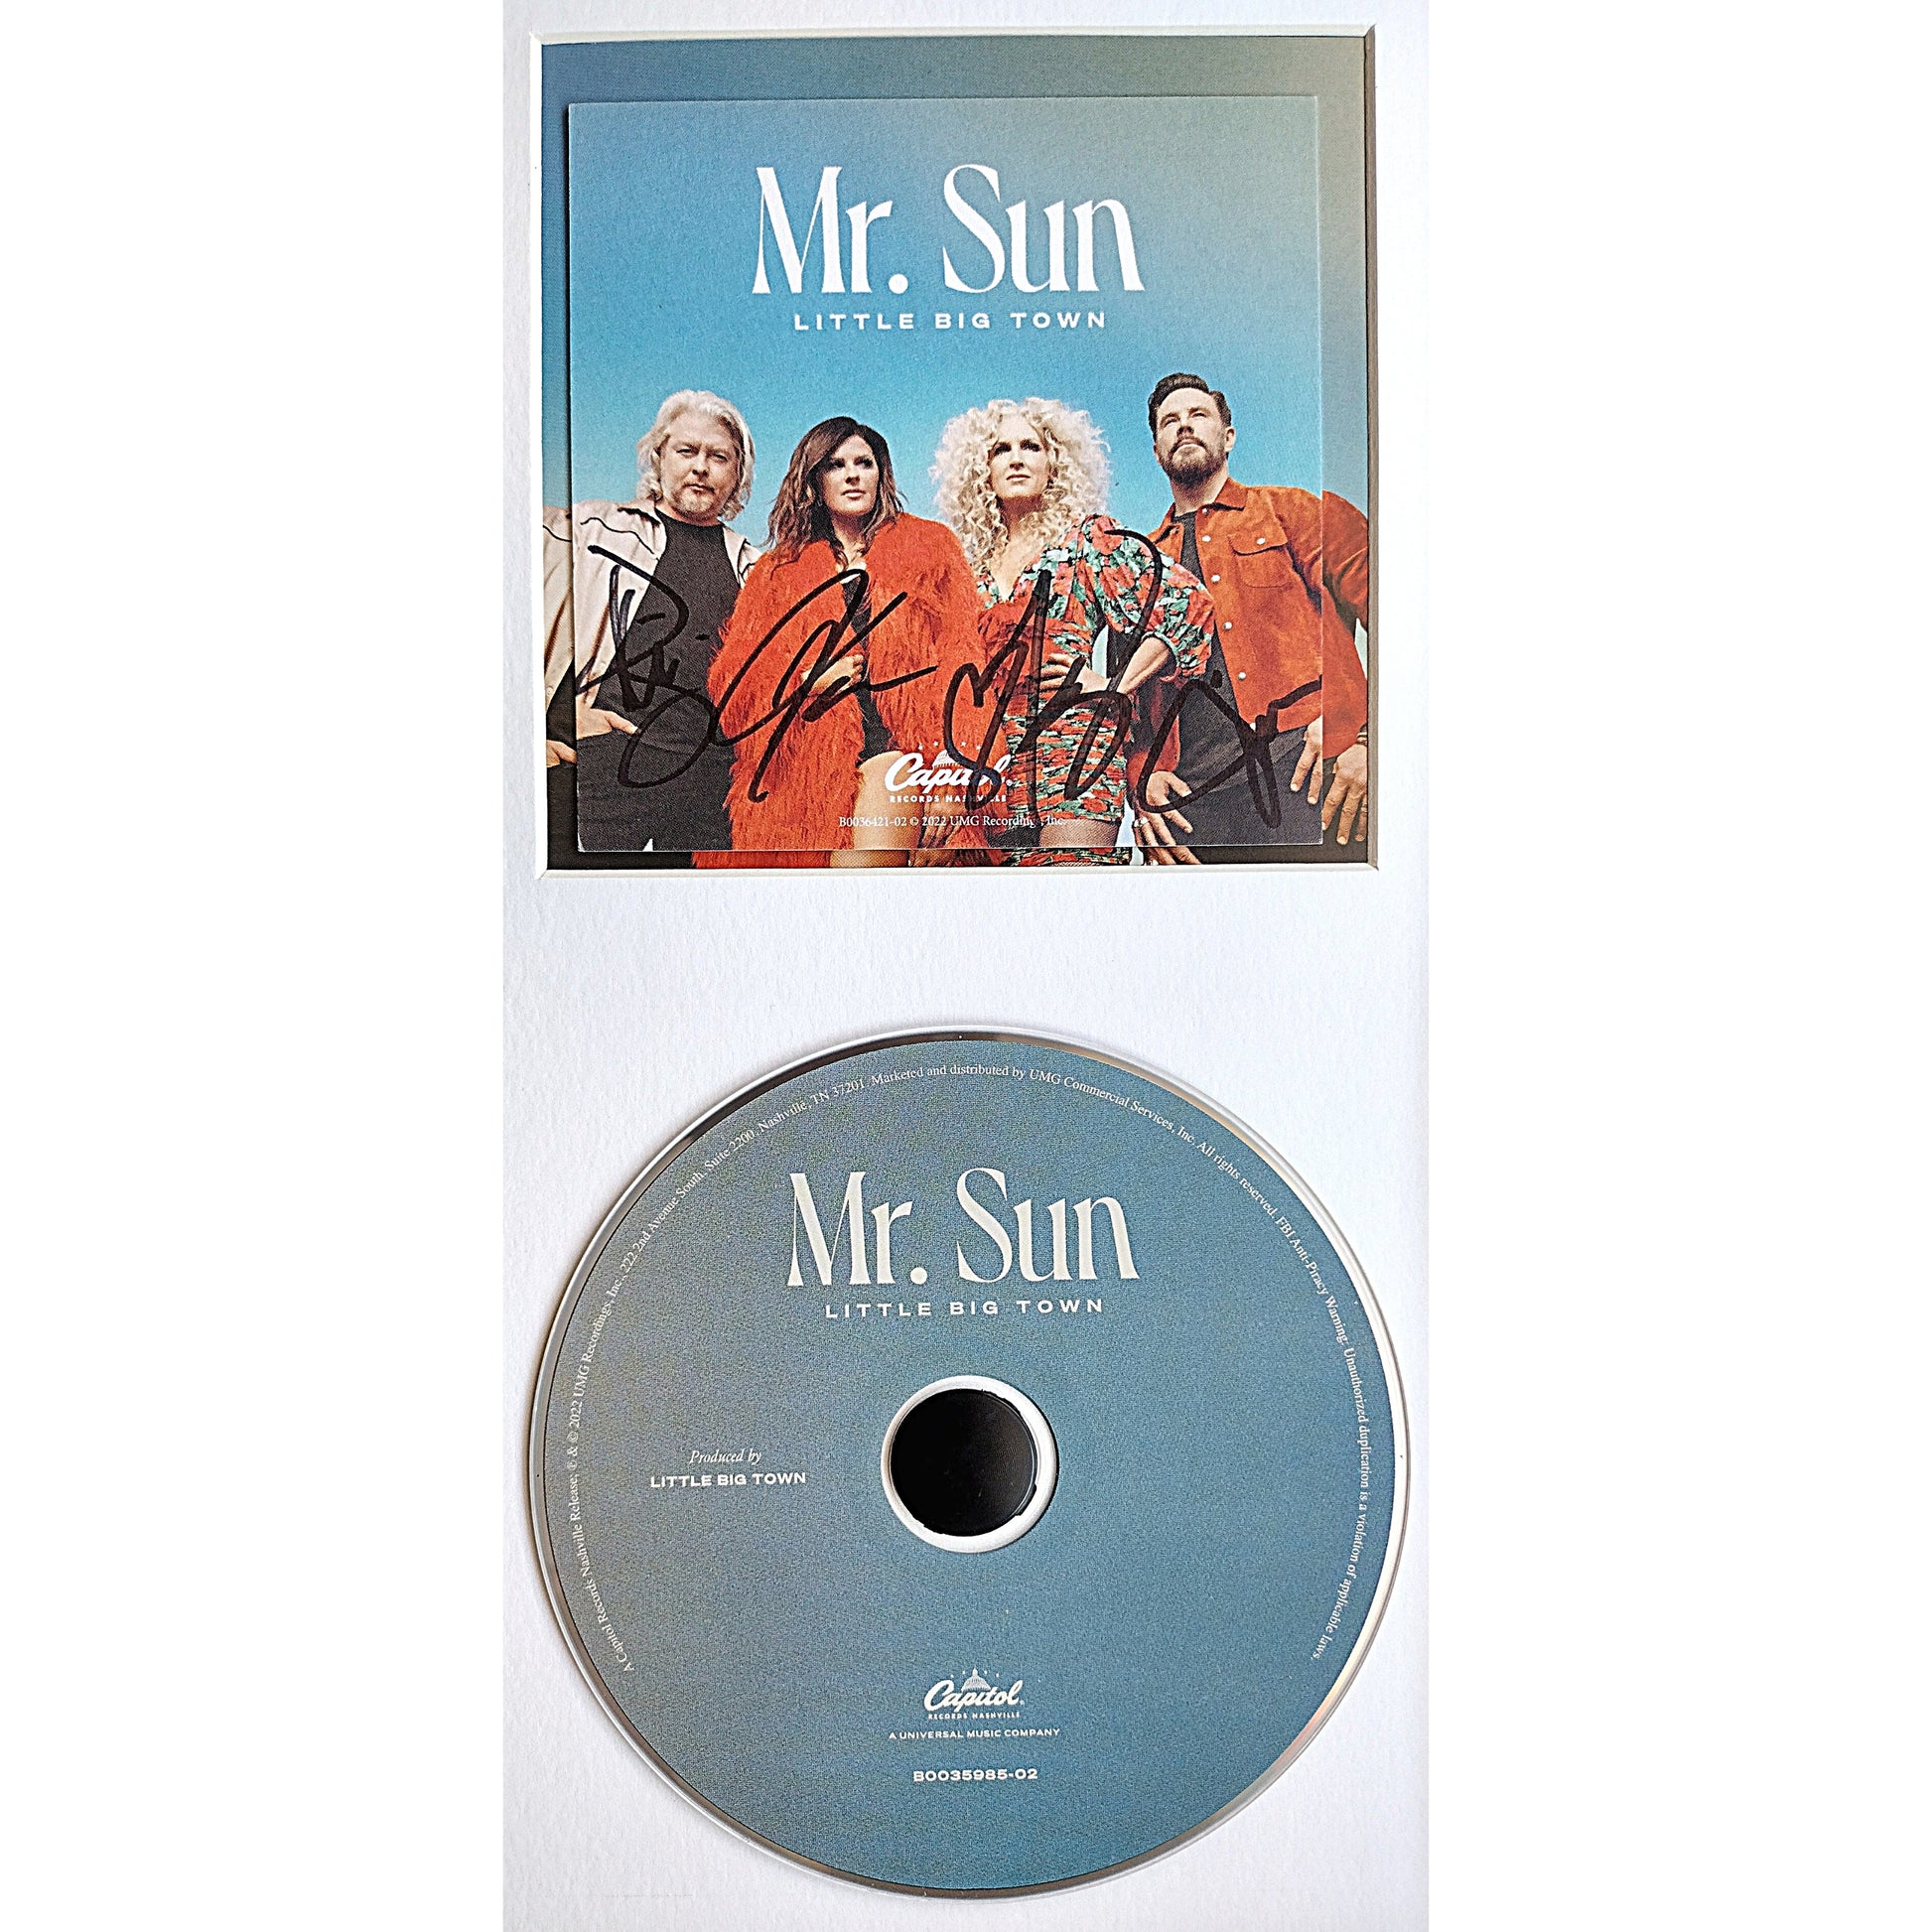 Music- Autographed- Little Big Town Band Signed Mr Sun CD Cover Insert Framed and Matted Wall Display Beckett Authentication AB86942 - 104b